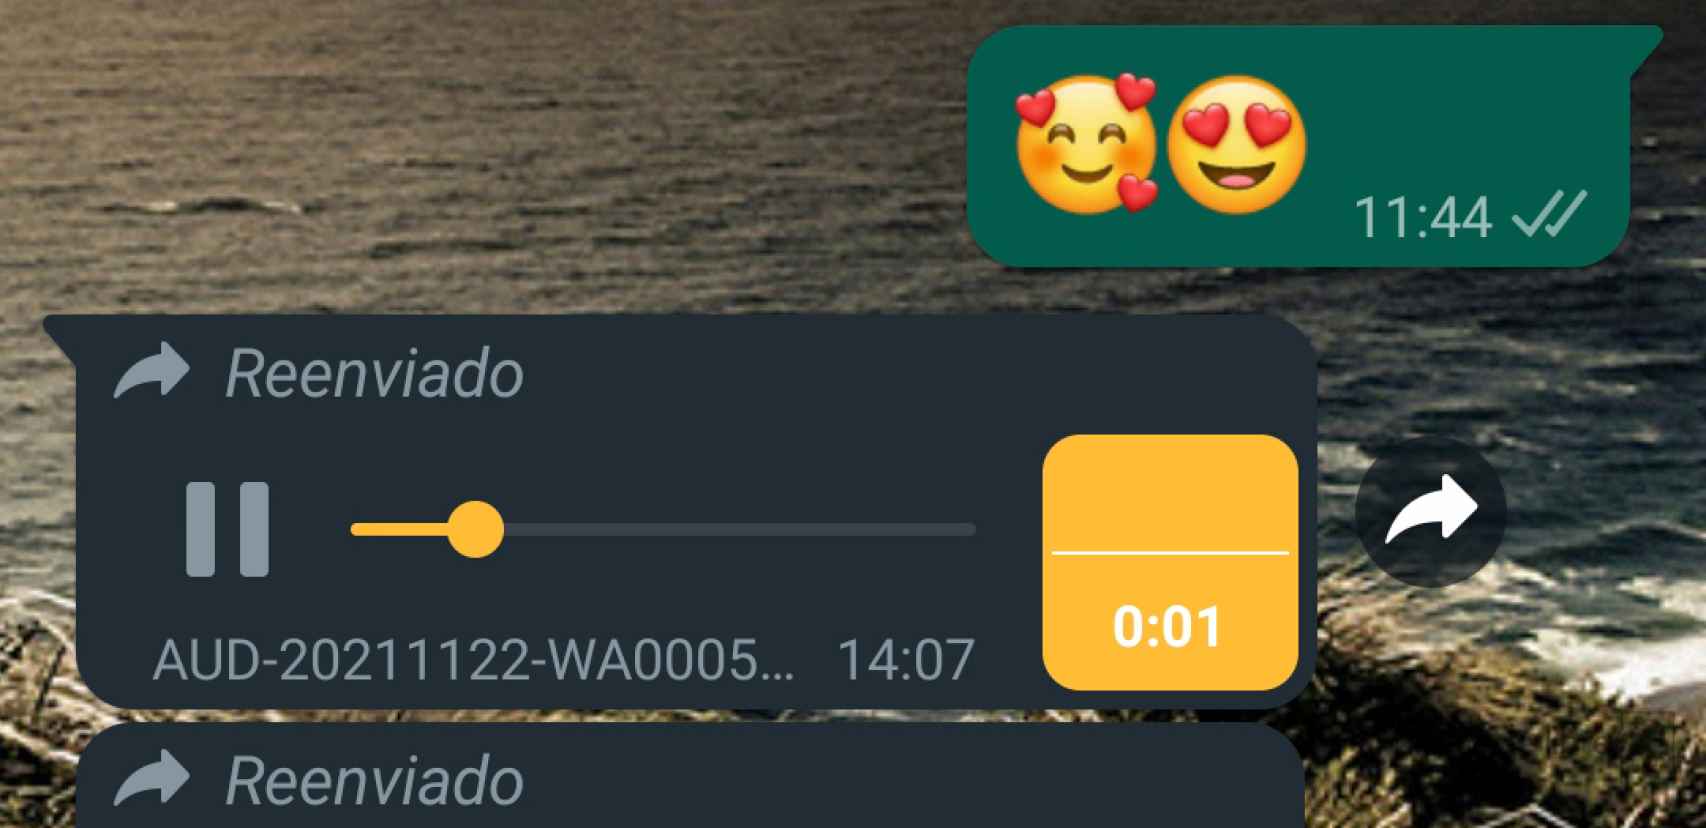 Current playback of any audio uploaded to WhatApp